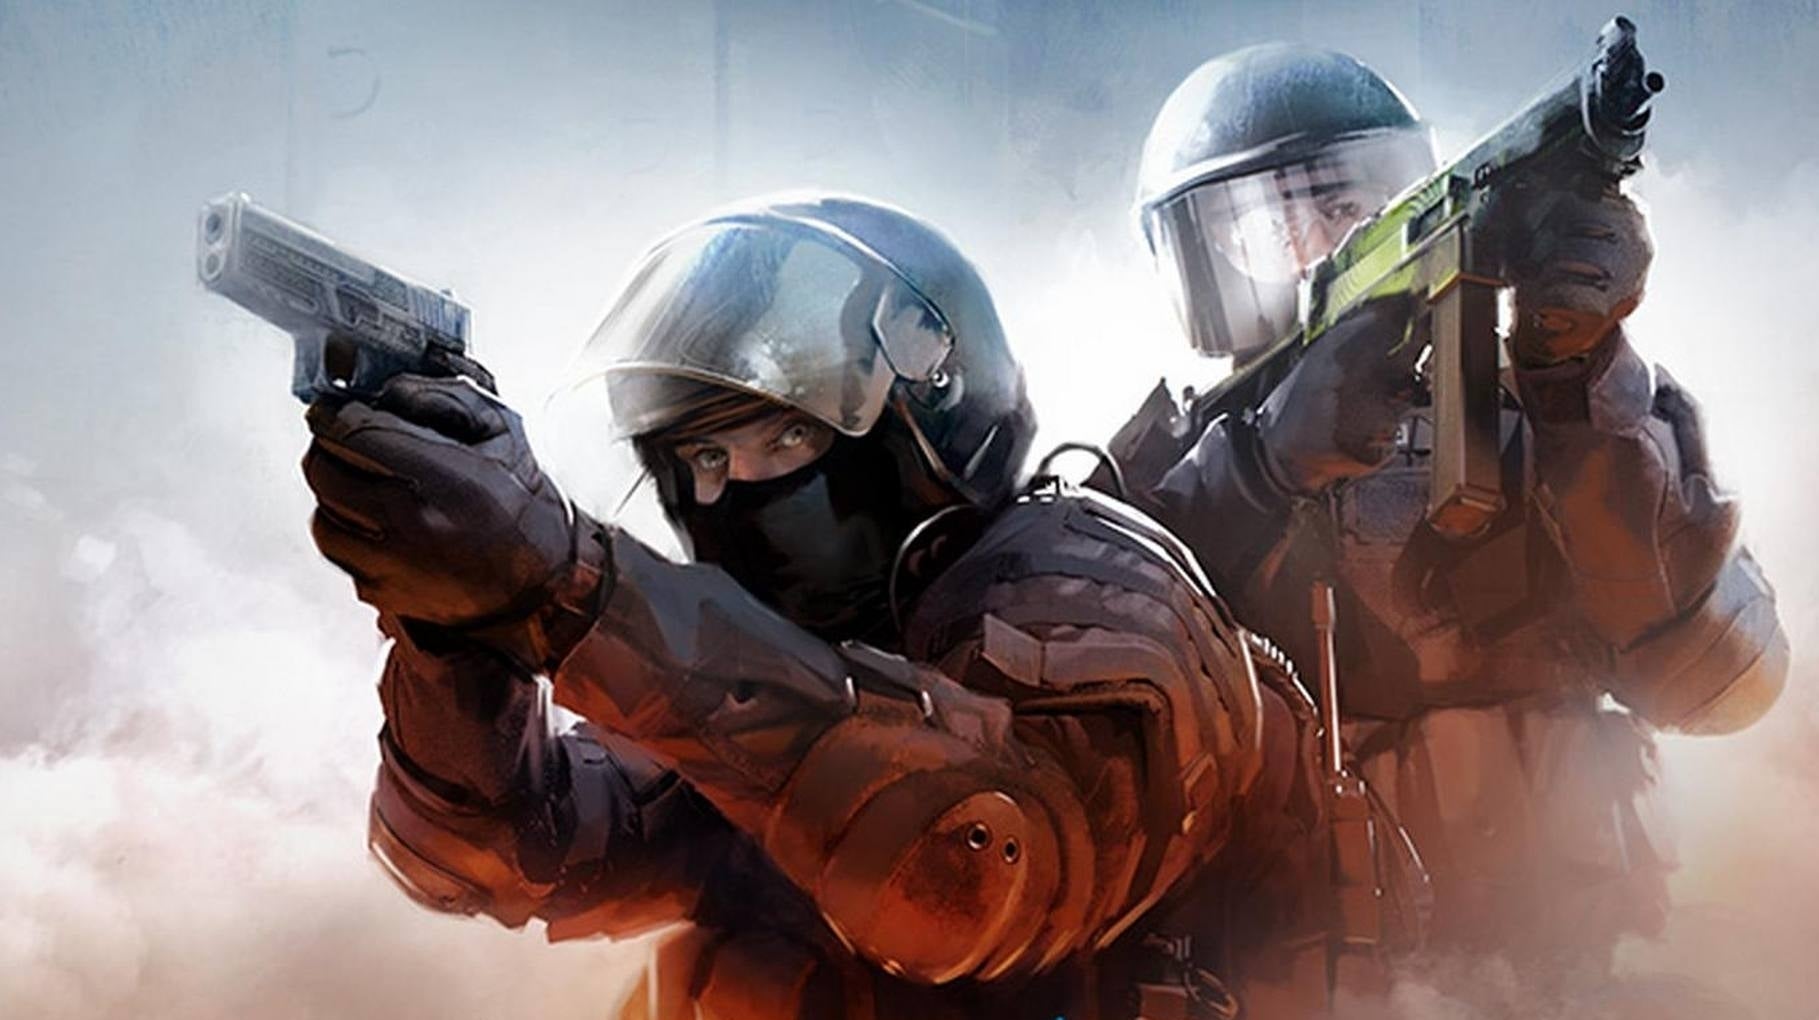 Image for CS:GO's battle royale mode now has respawns and a ping system too